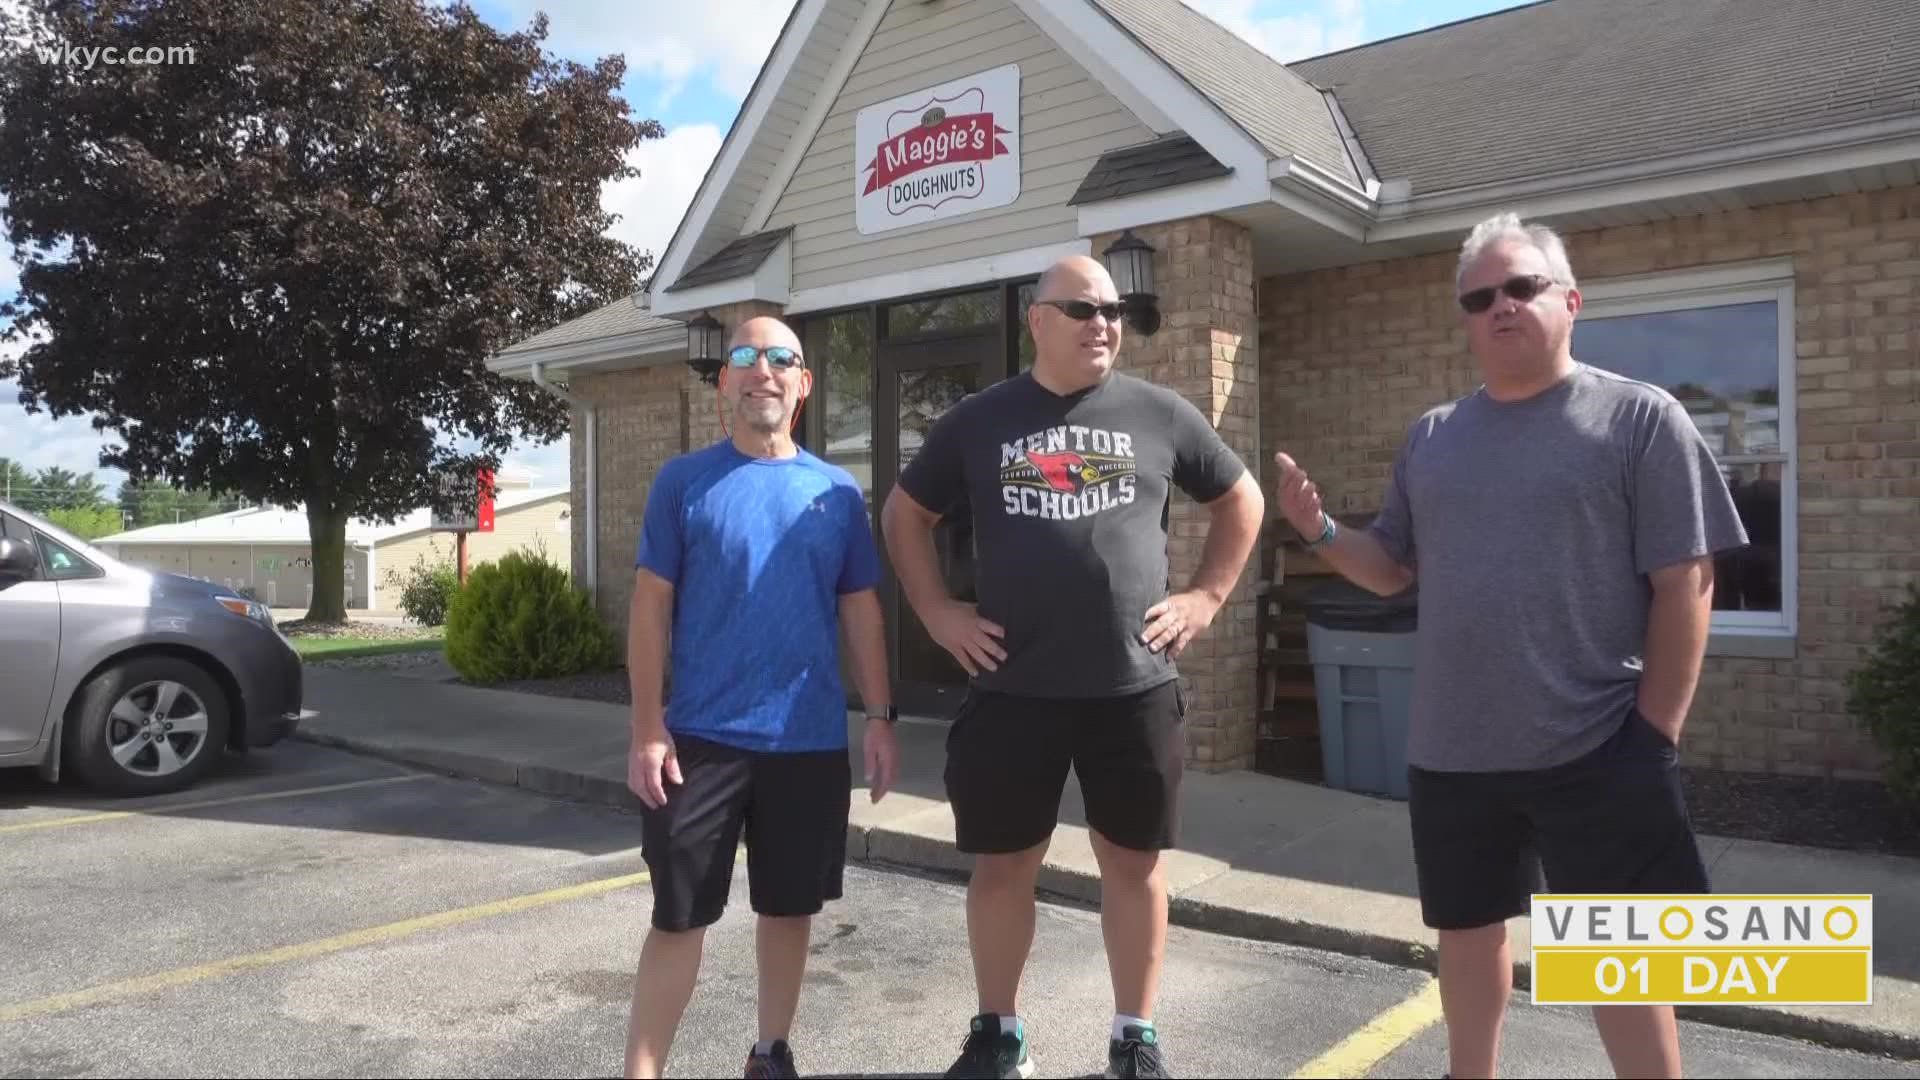 Three friends known as the Donut Dudes are joining forces to ride in the Cleveland VeloSano, raising money for cancer research at the Cleveland Clinic.